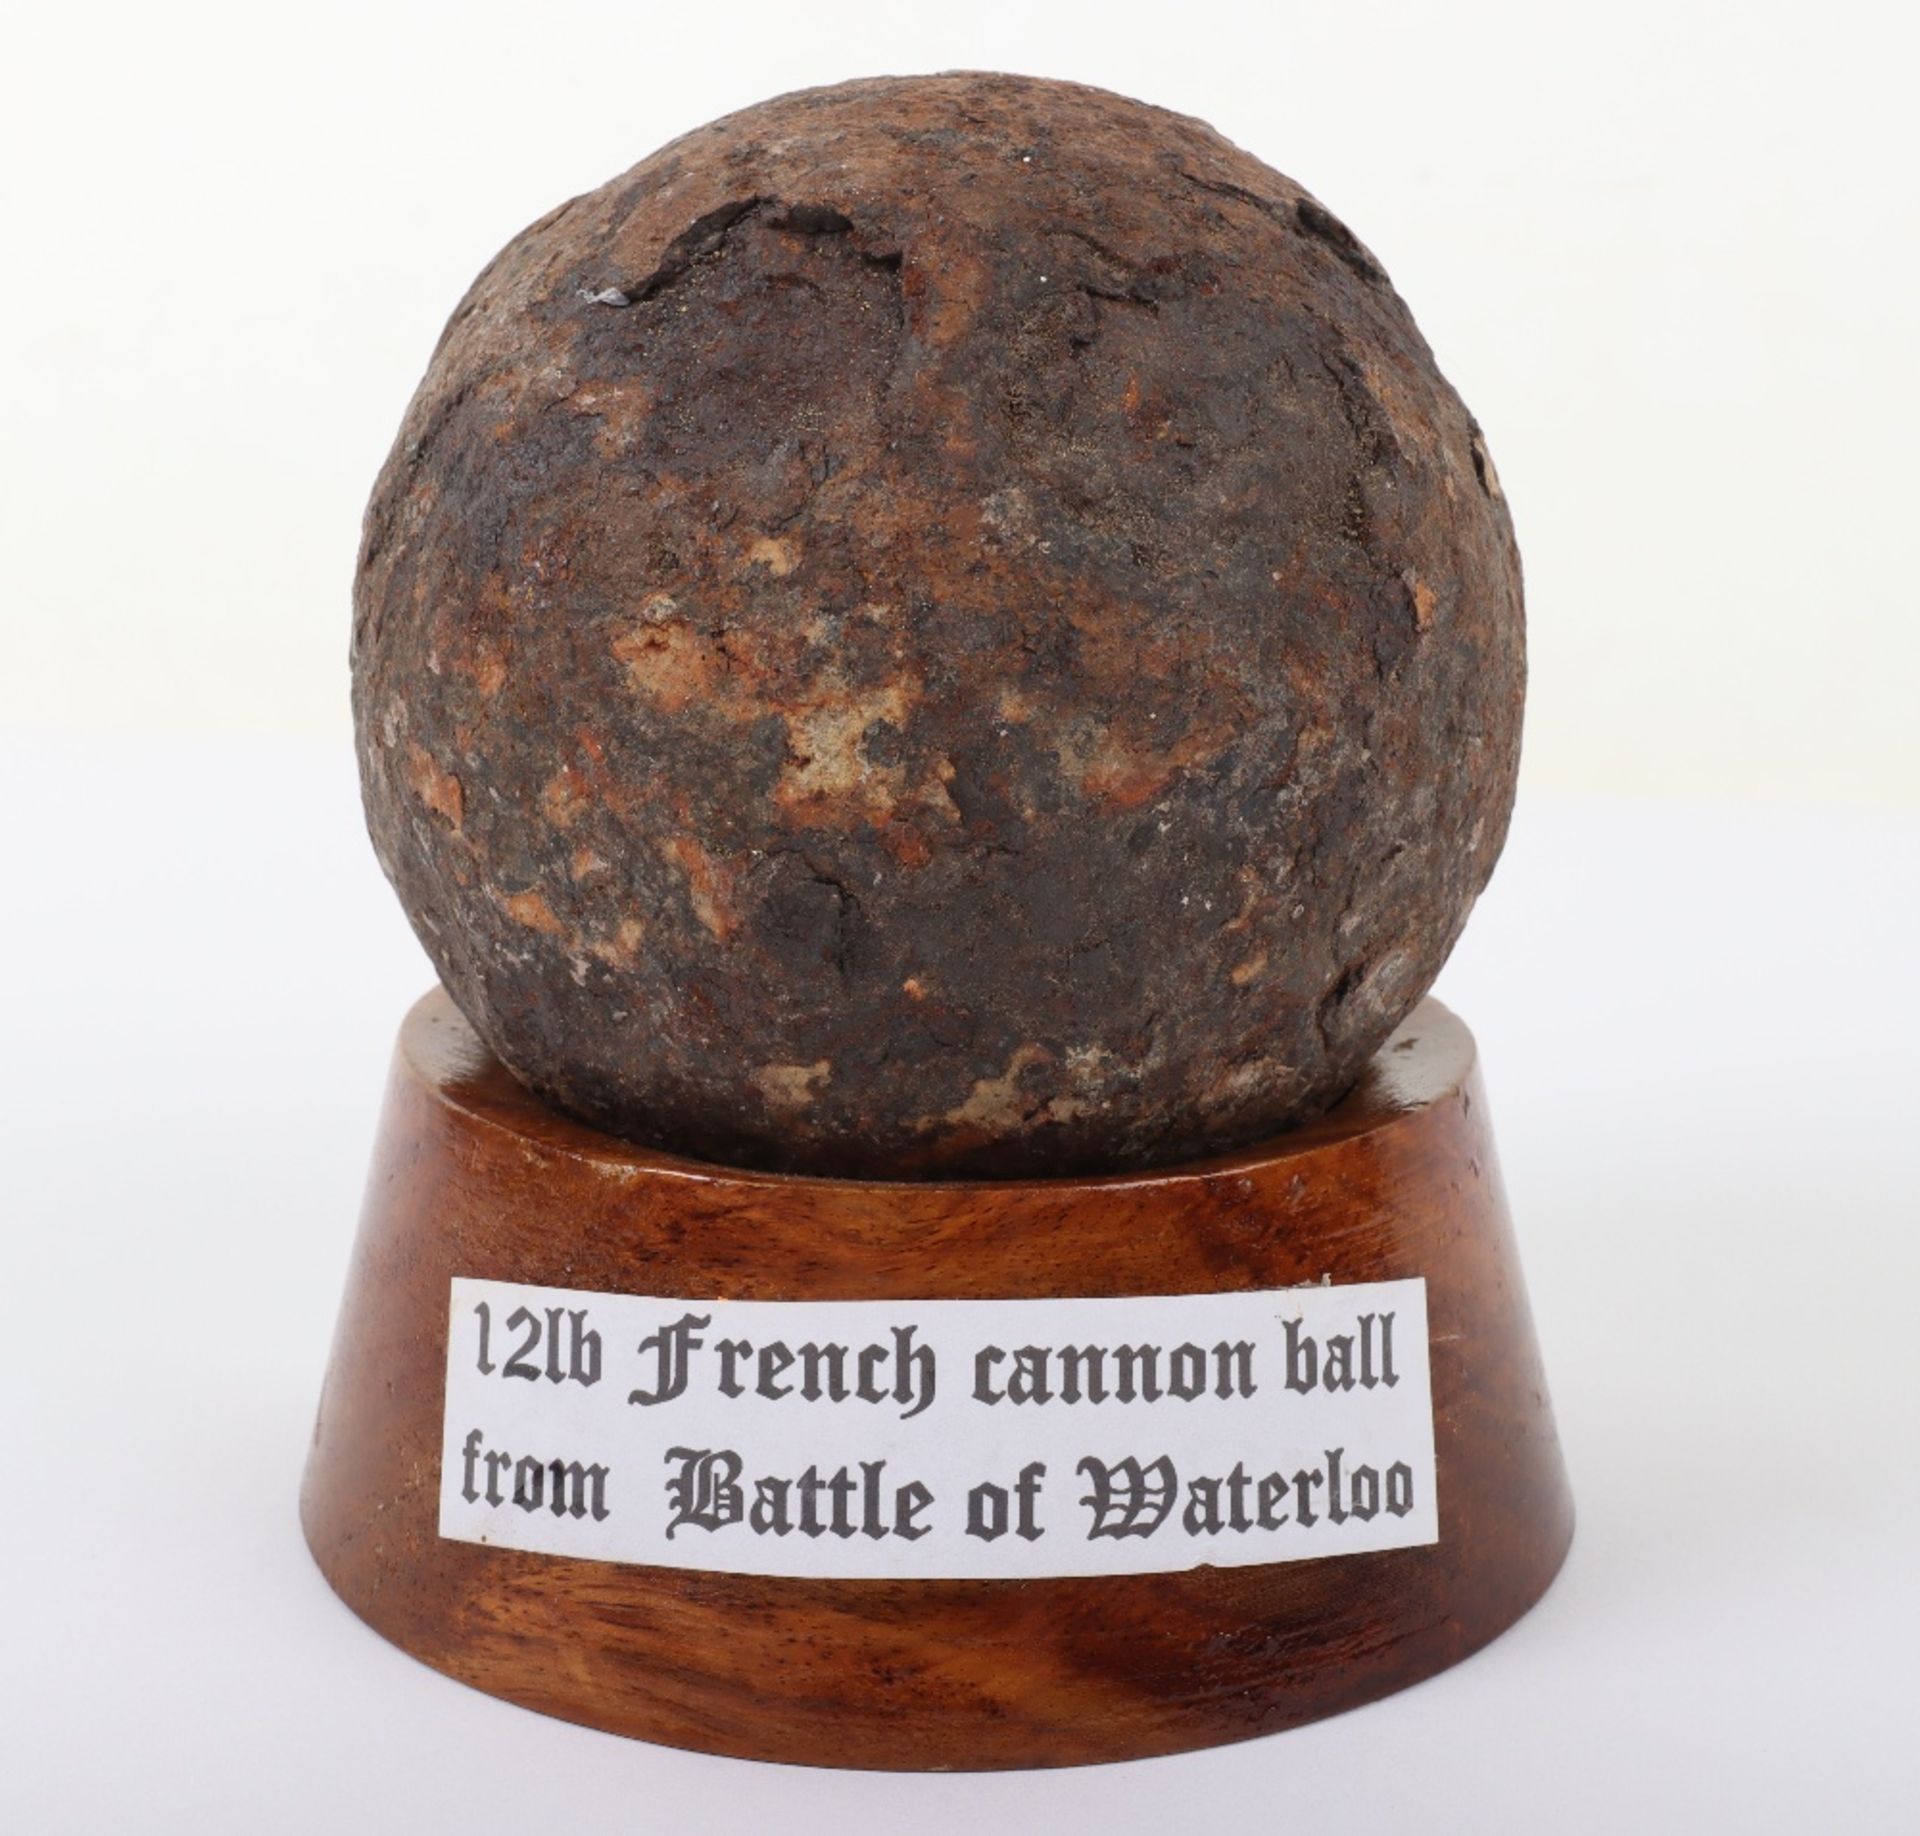 Battle of Waterloo Battlefield Excavated 12lb French Cannon Ball - Image 2 of 3